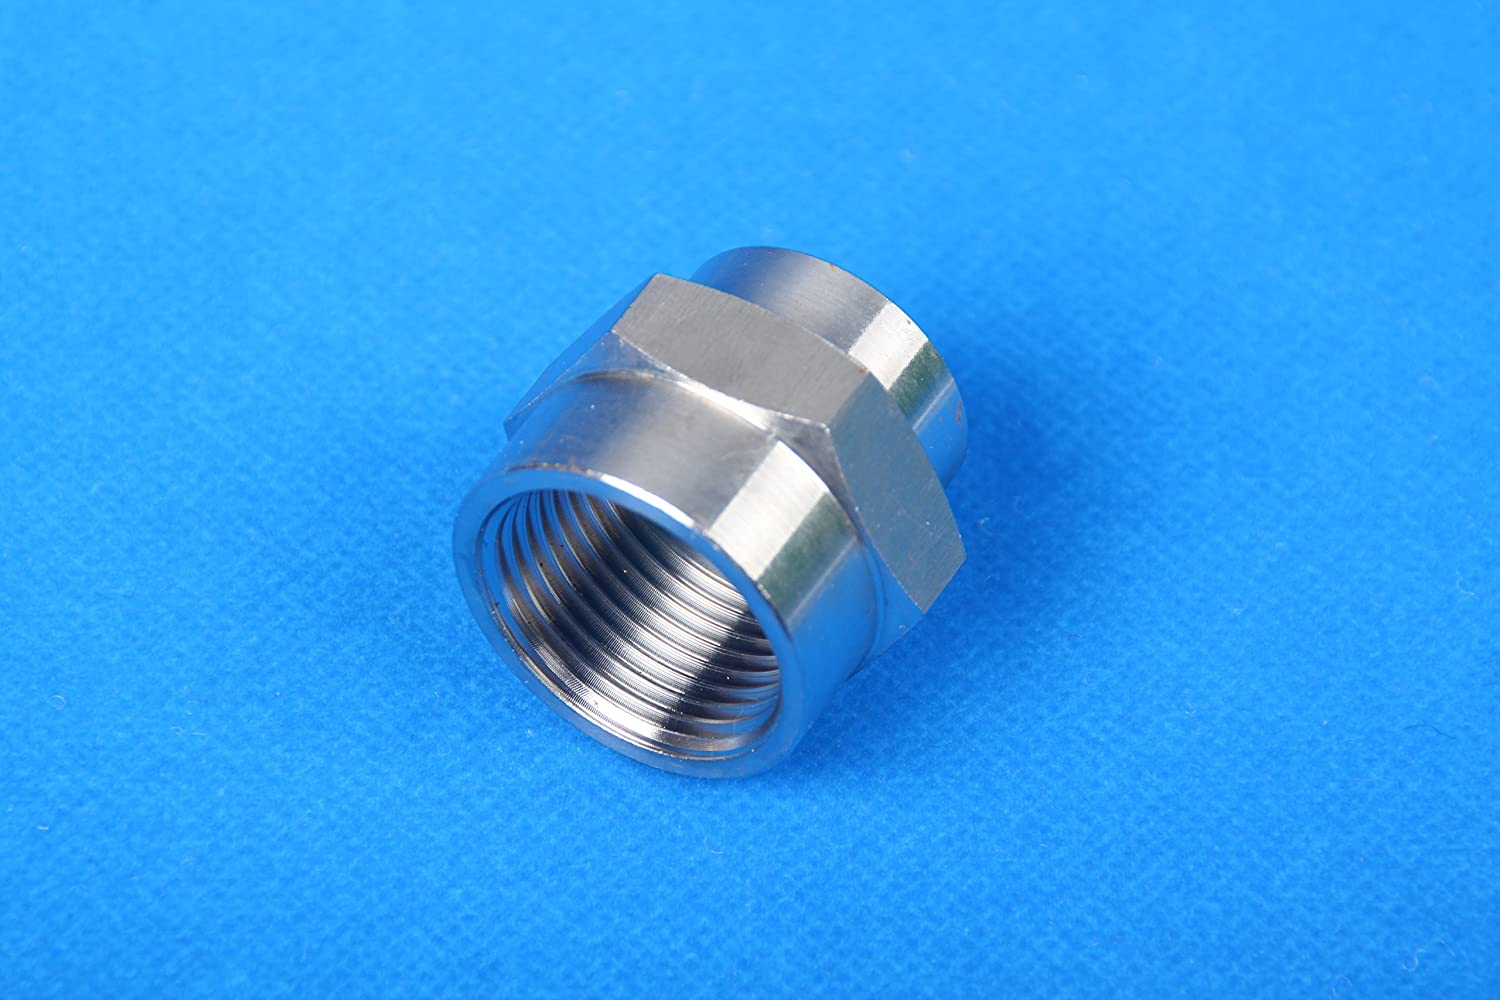 LTWFITTING Bar Production Stainless Steel 316 Pipe Fitting 3/4 Inch x 1/2 Inch Female NPT Reducing Coupling Water Boat (Pack of 25)